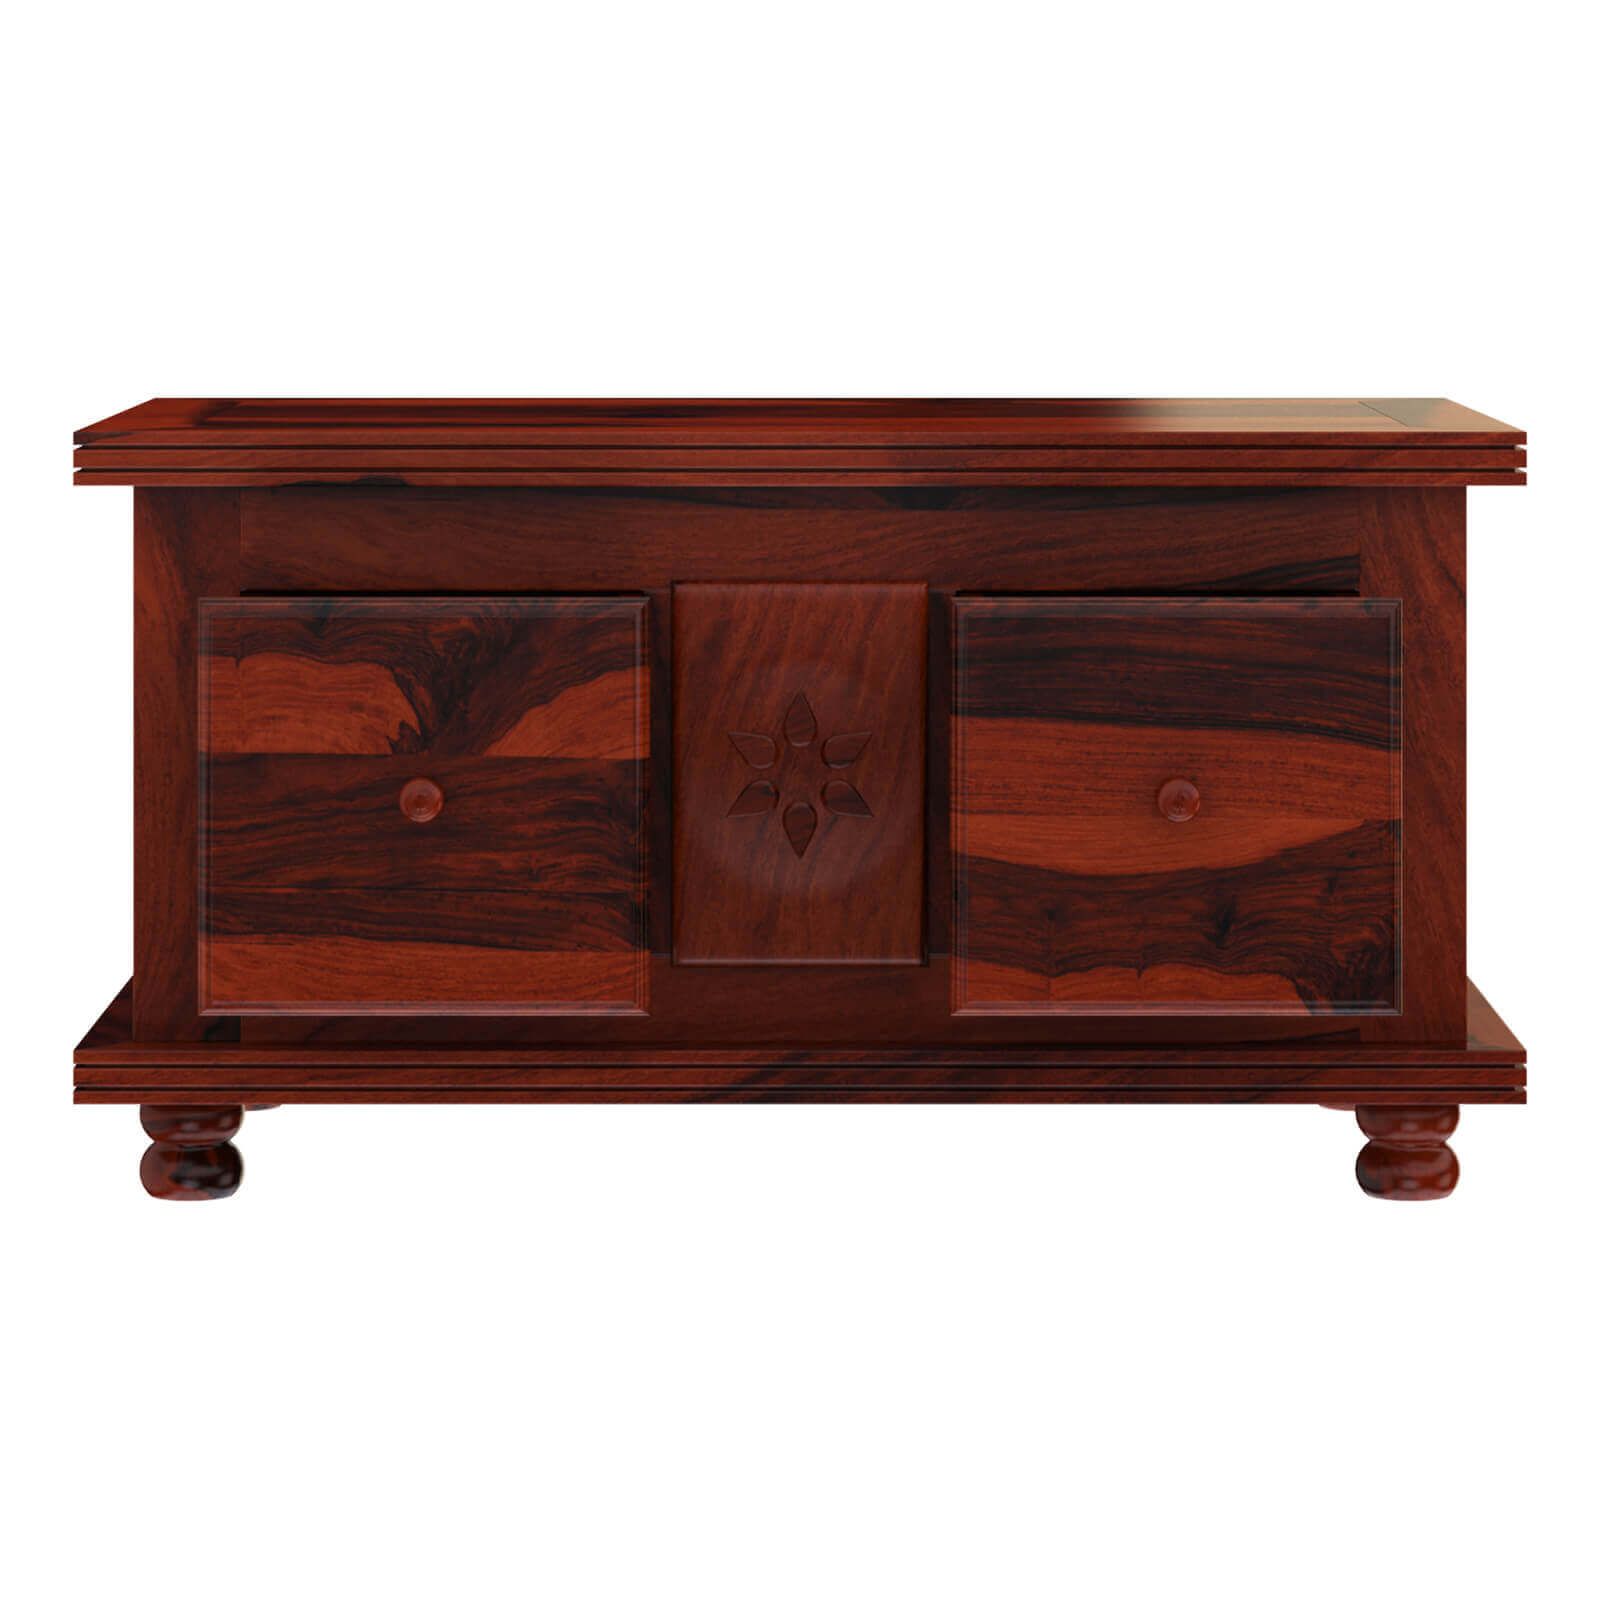 Arca Rustic Solid Wood 2 Drawer Storage Cocktail Coffee Table Pertaining To 2 Drawer Cocktail Tables (View 4 of 15)